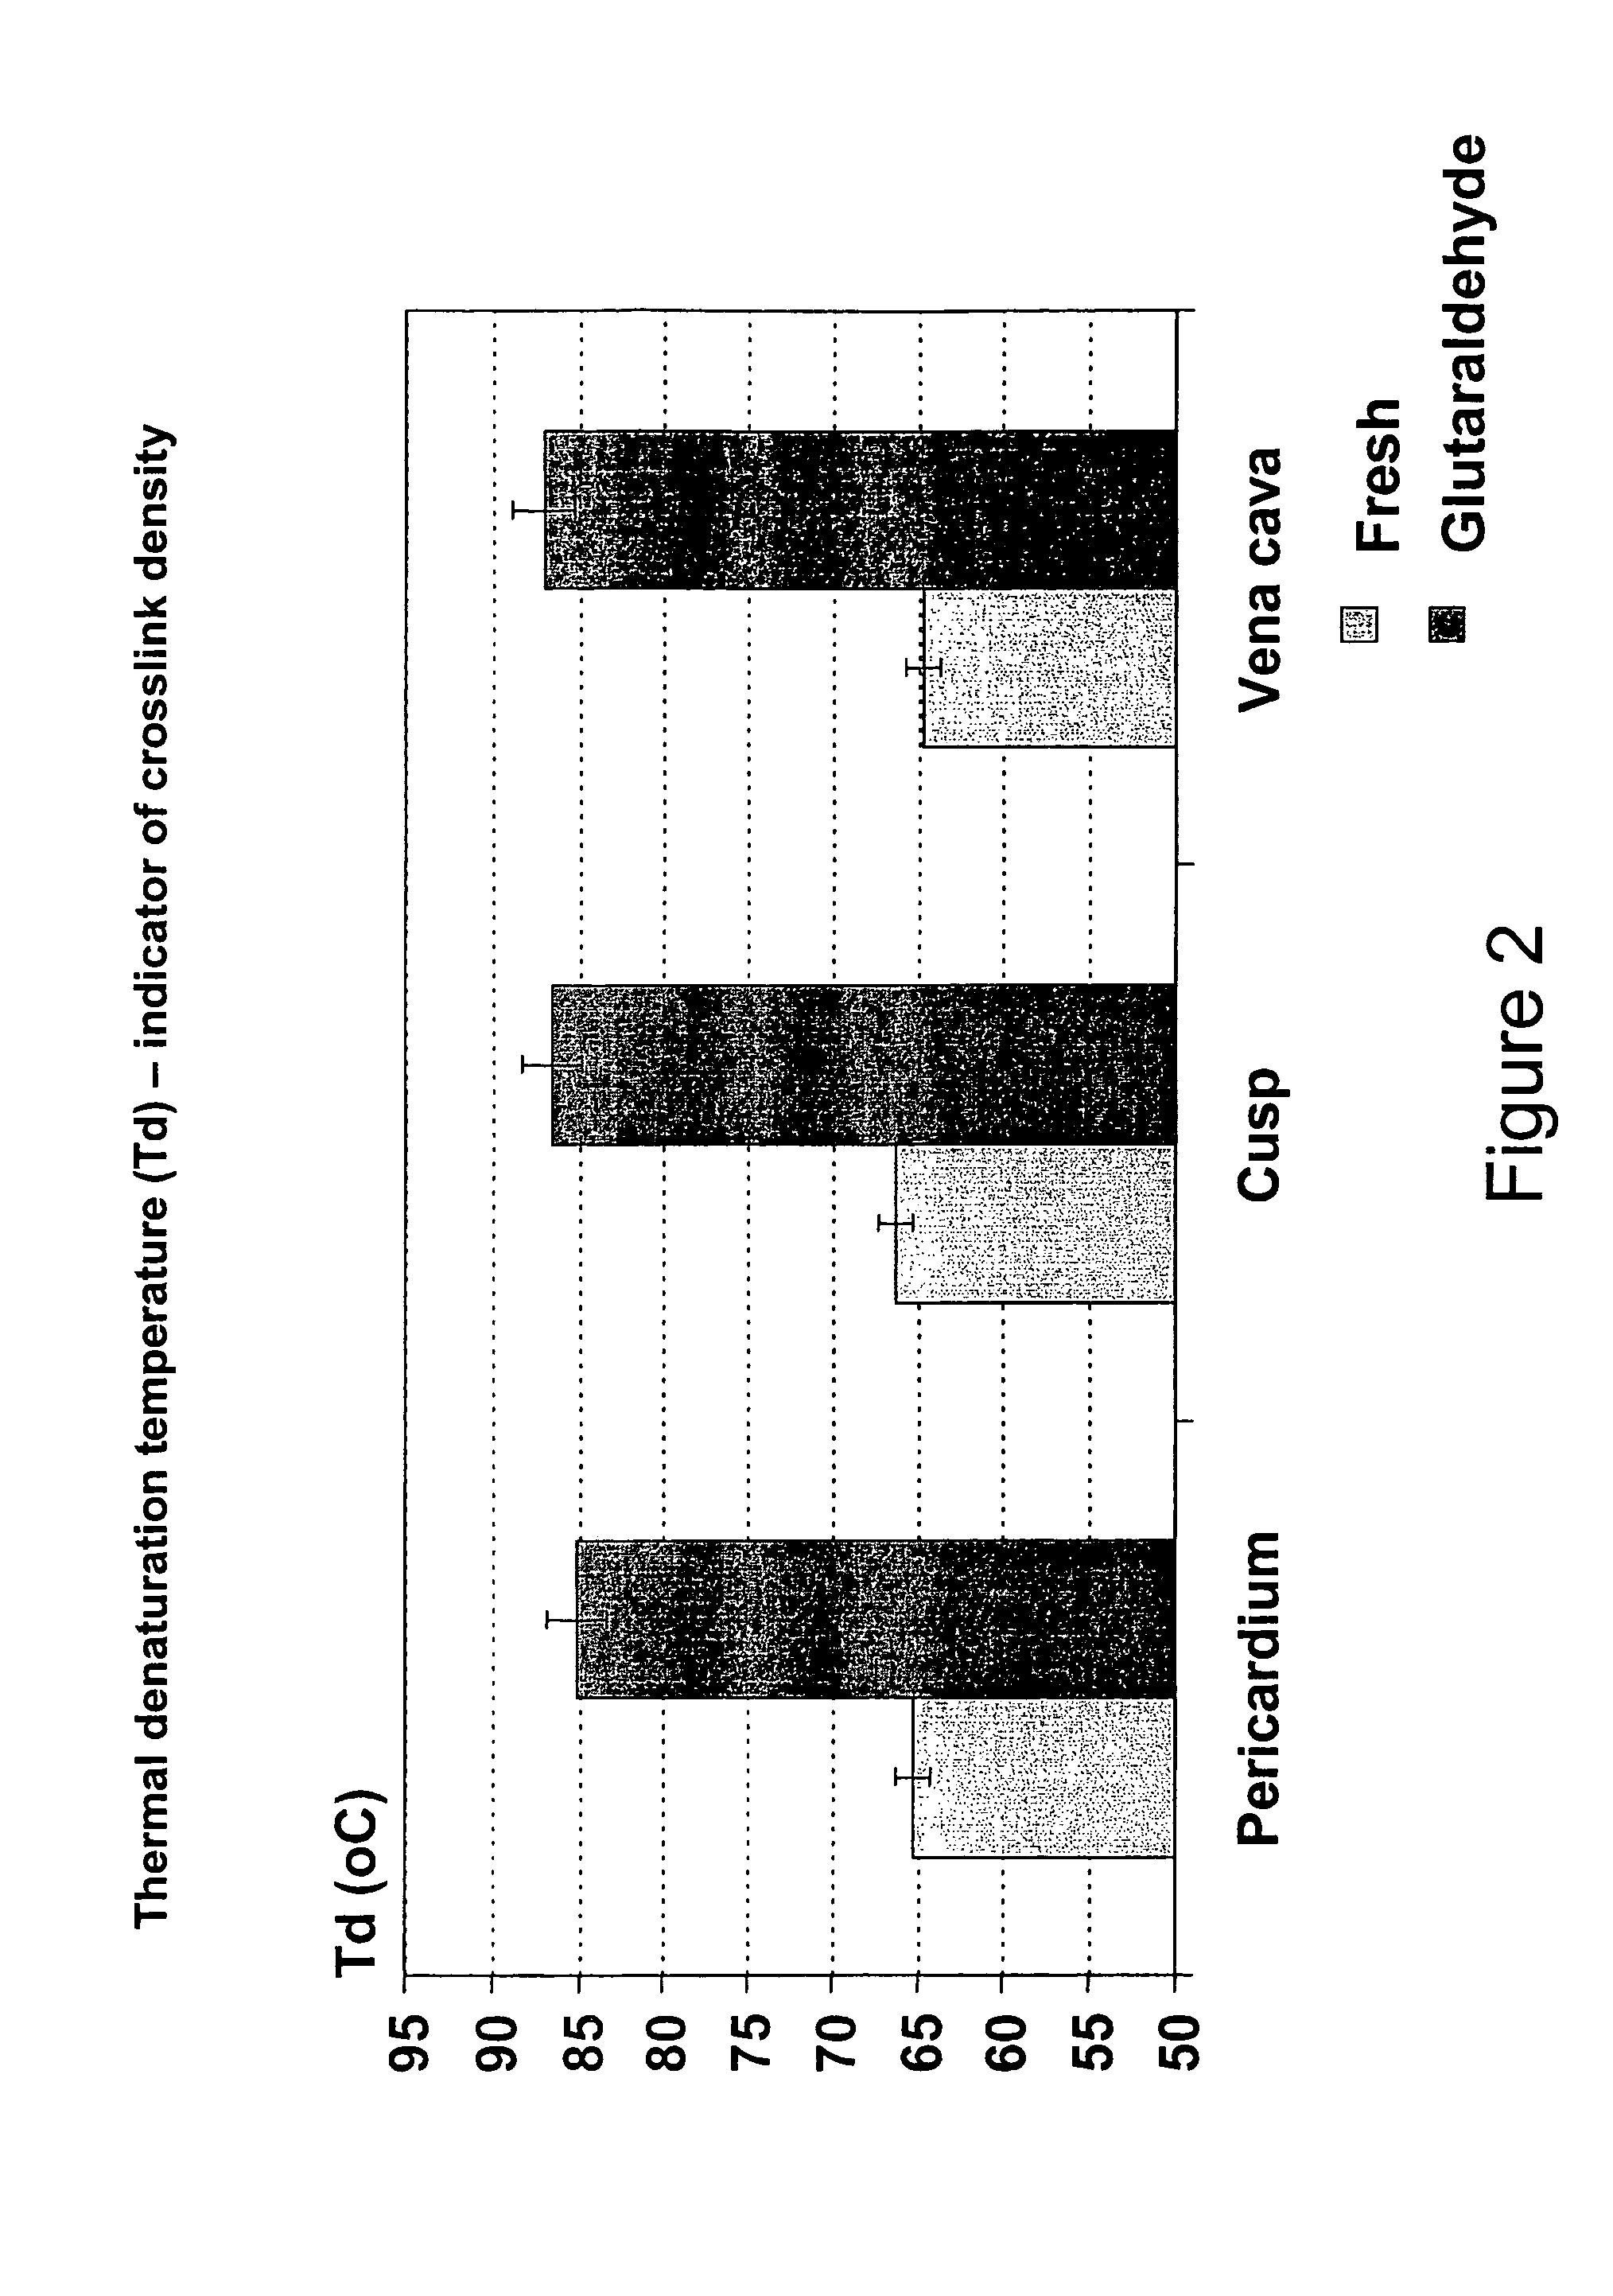 Tissue material process for forming bioprosthesis